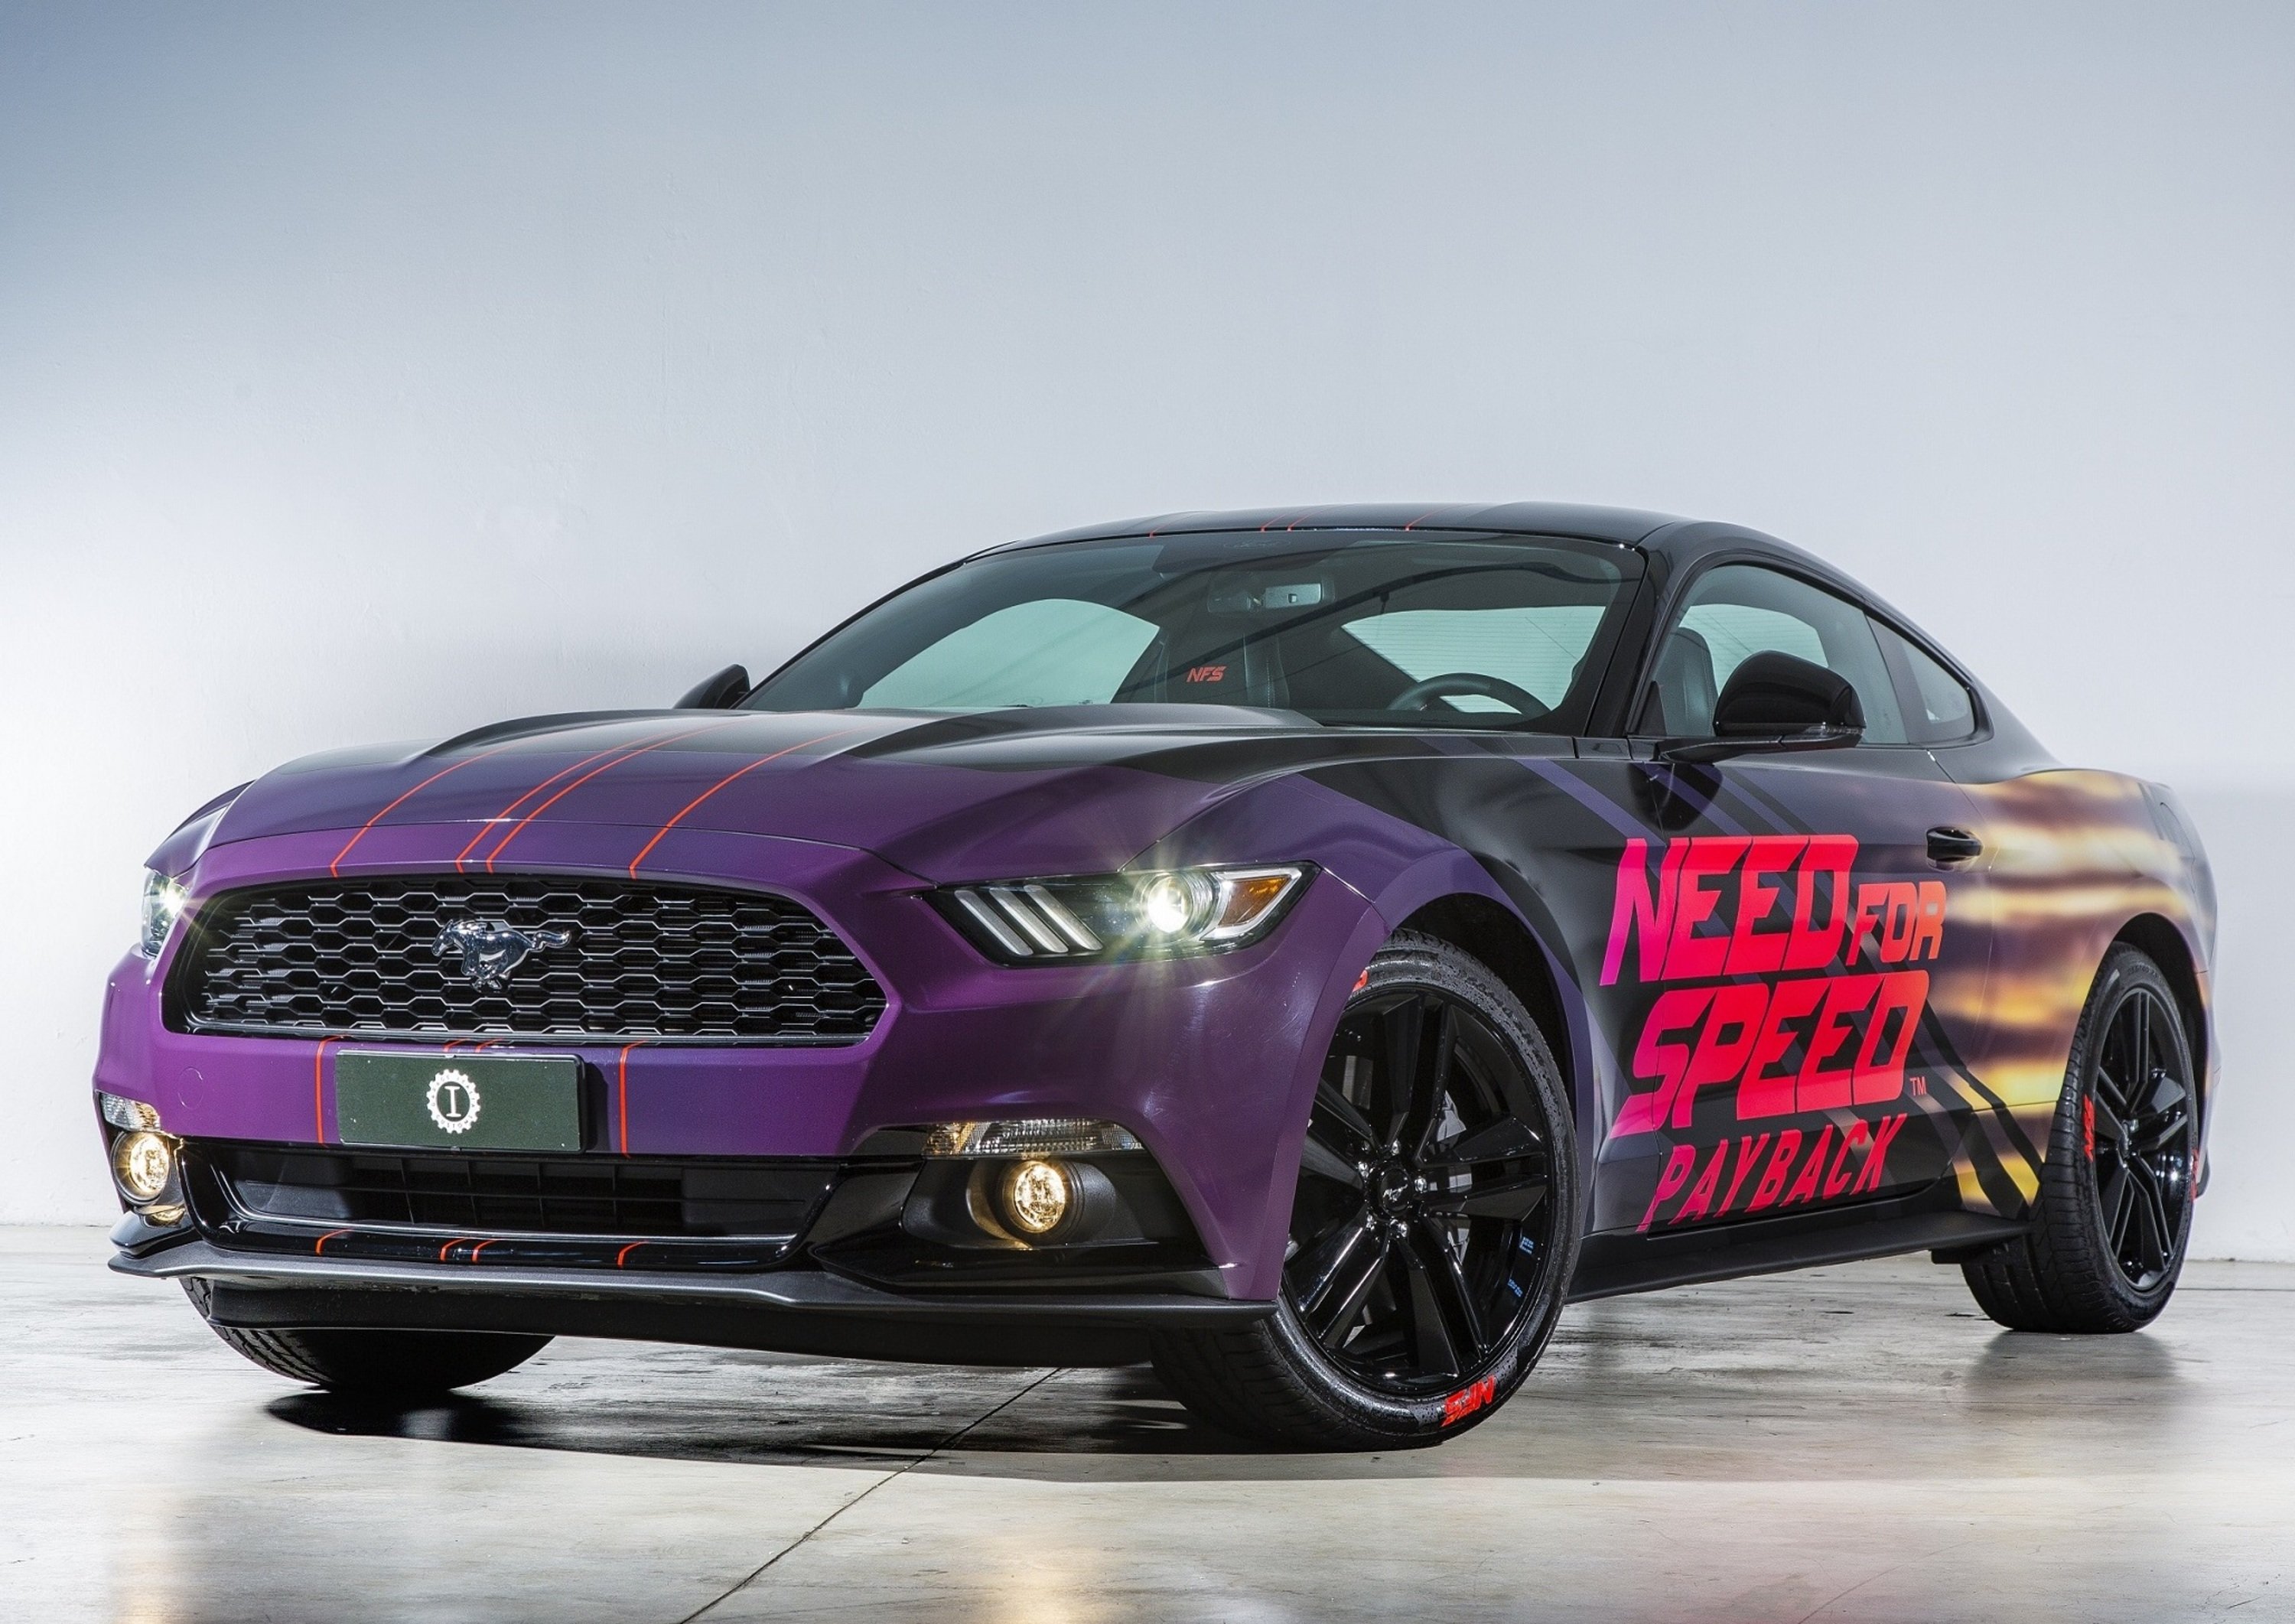 Ford Mustang Need for Speed Payback, firmata Garage Italia Customs